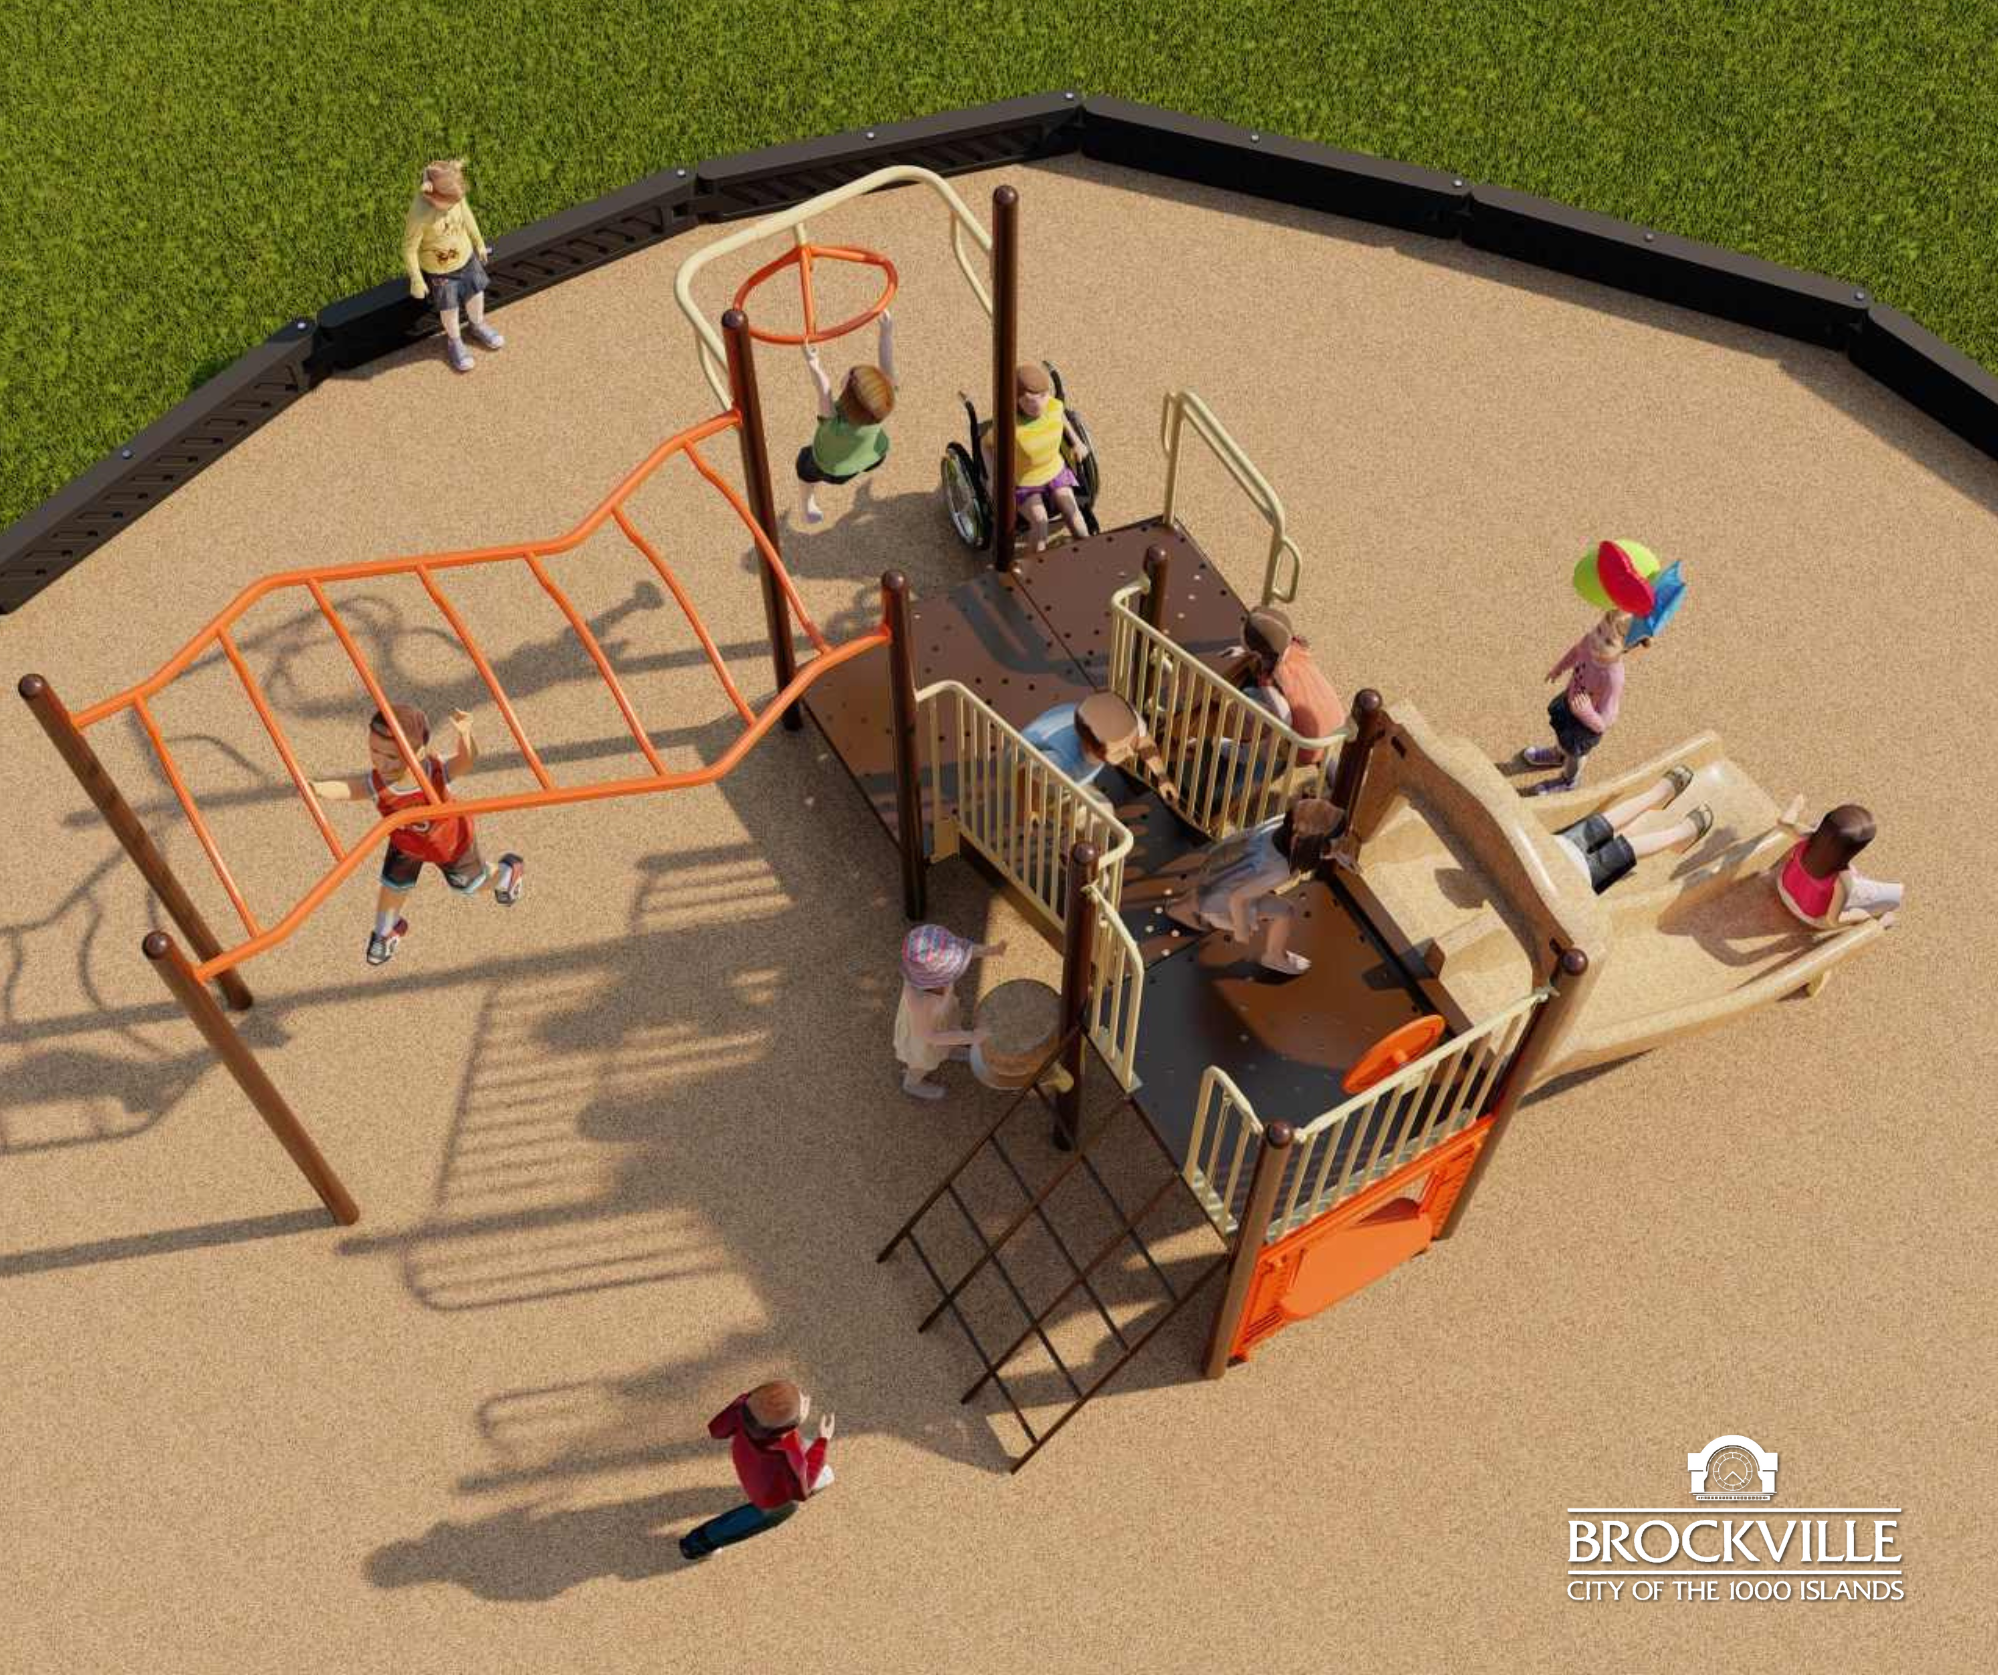 New Play Structures